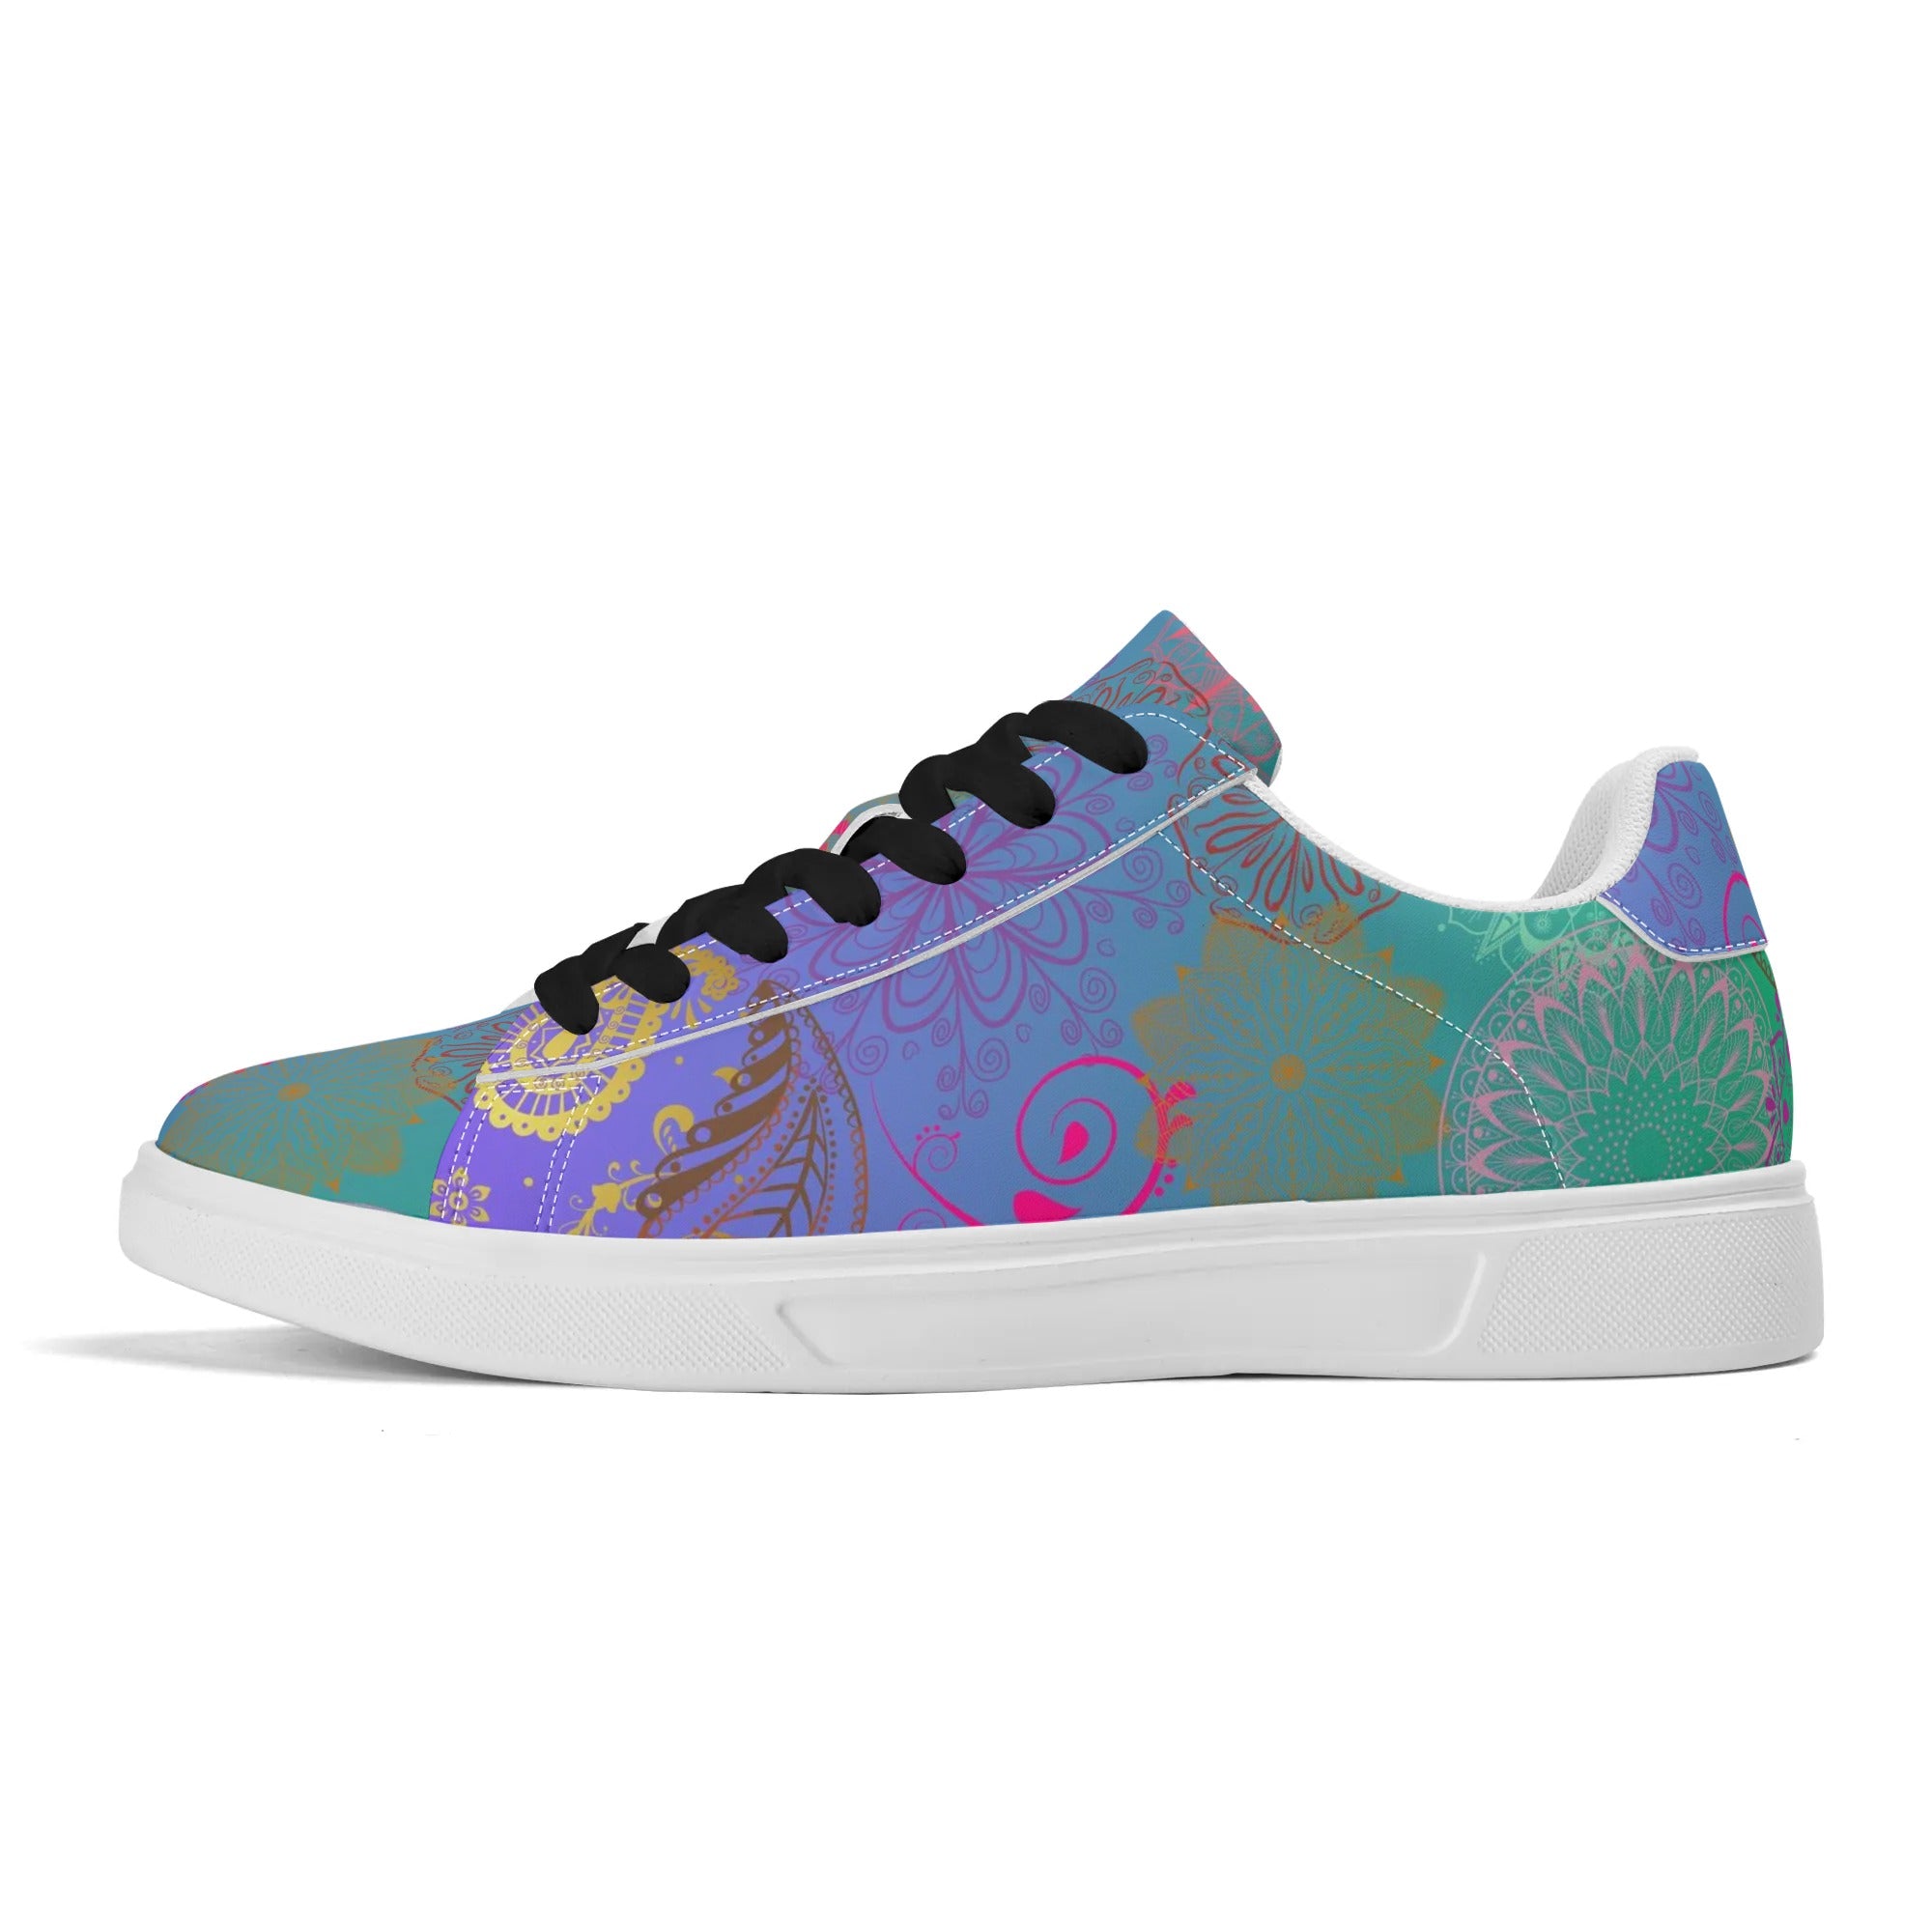 Paisley Mist Adult Lightweight Low Top Leather Skateboard Shoes